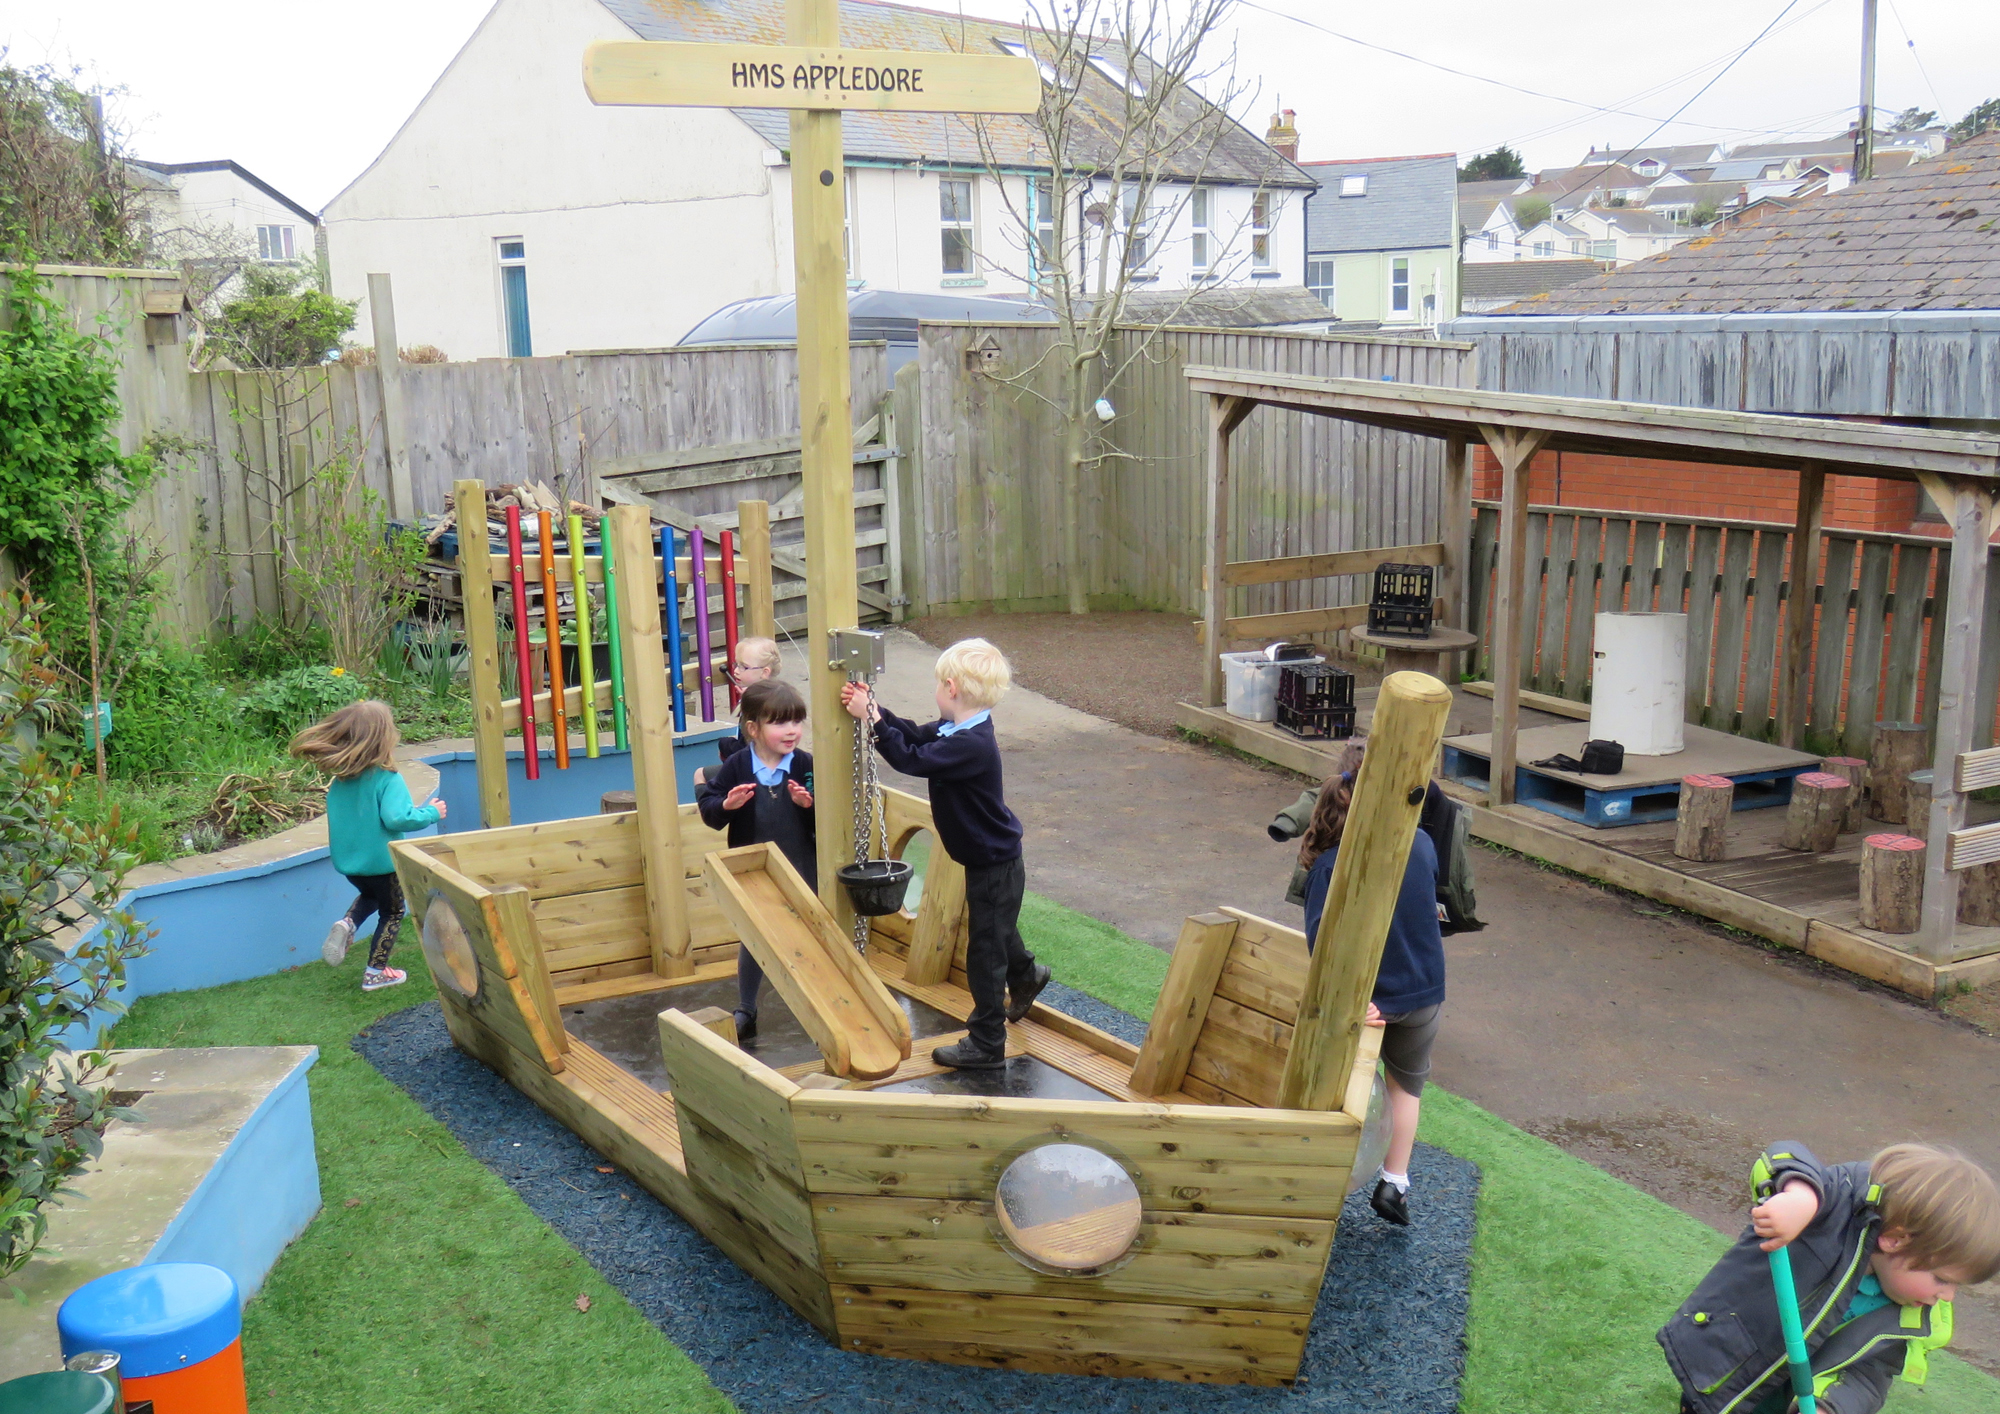 Children playing on a wooden play boat in a school playground